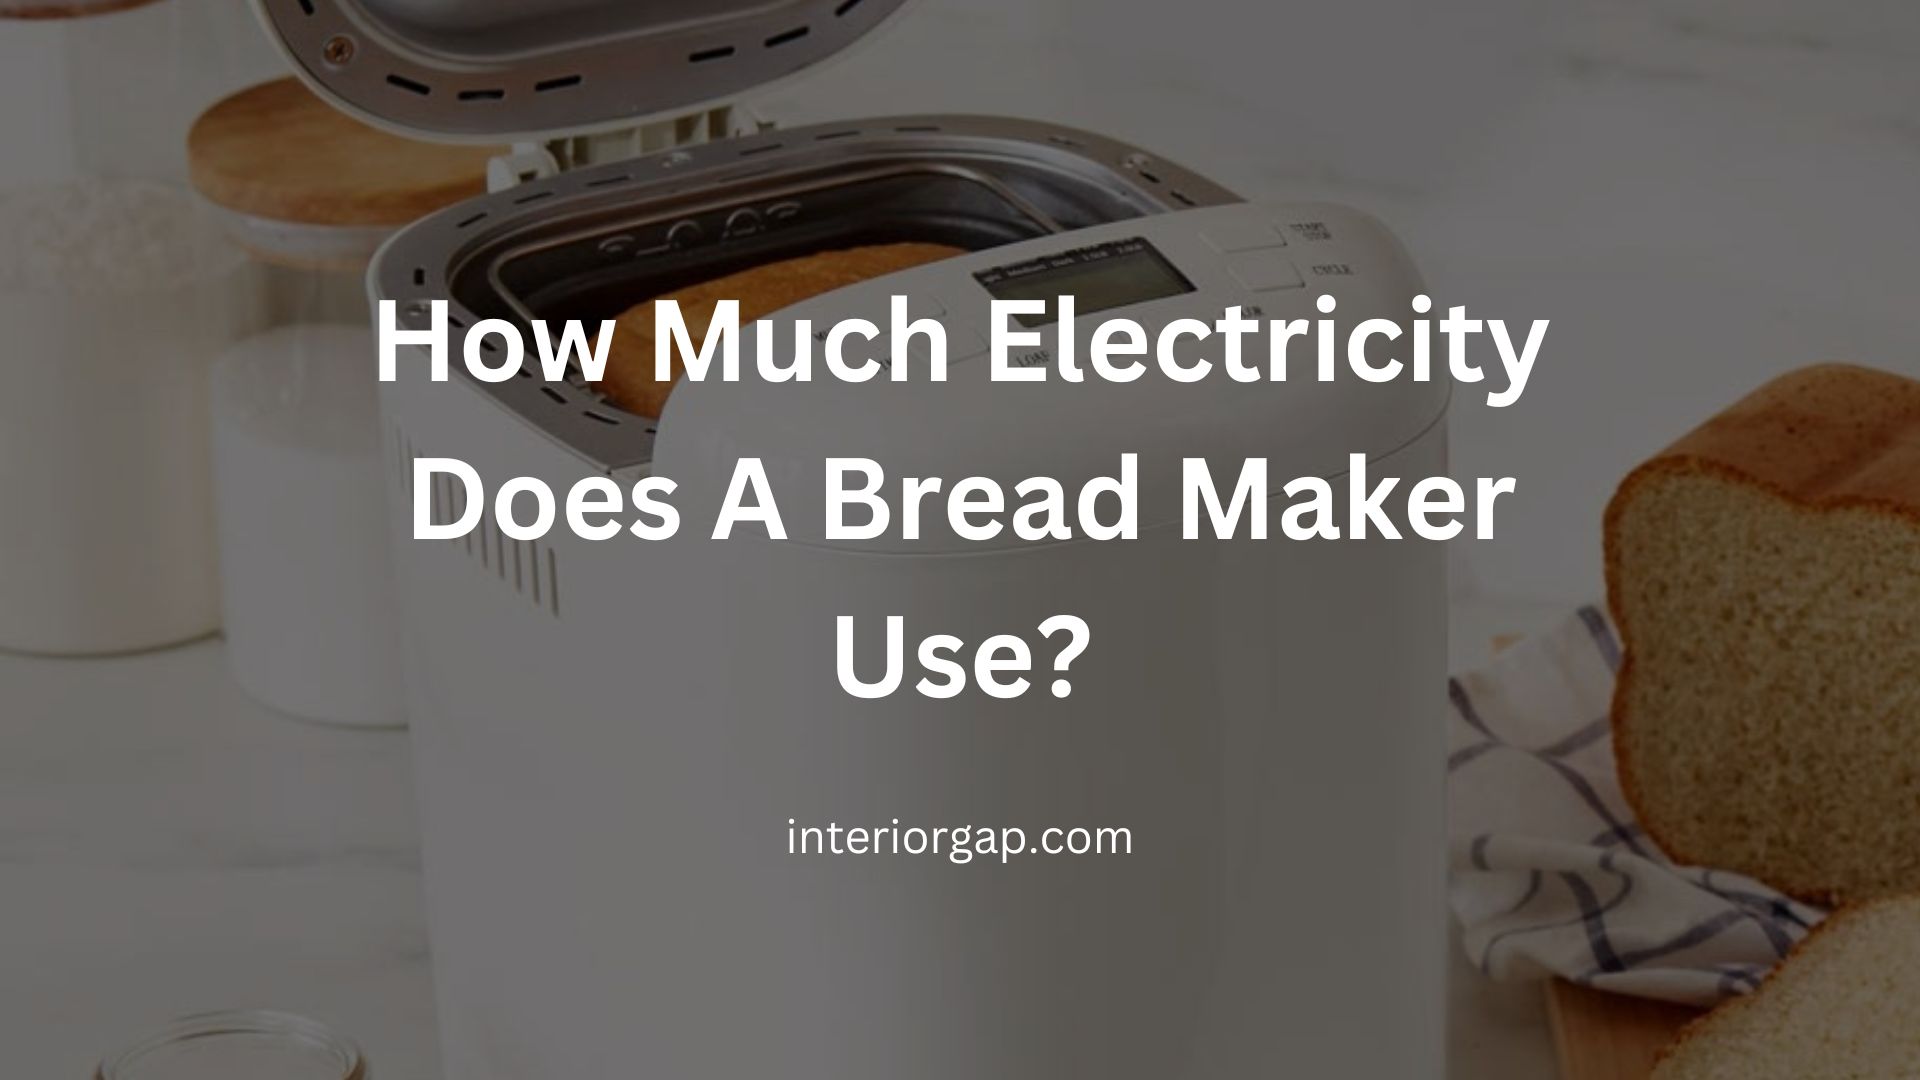 How Much Electricity Does A Bread Maker Use?